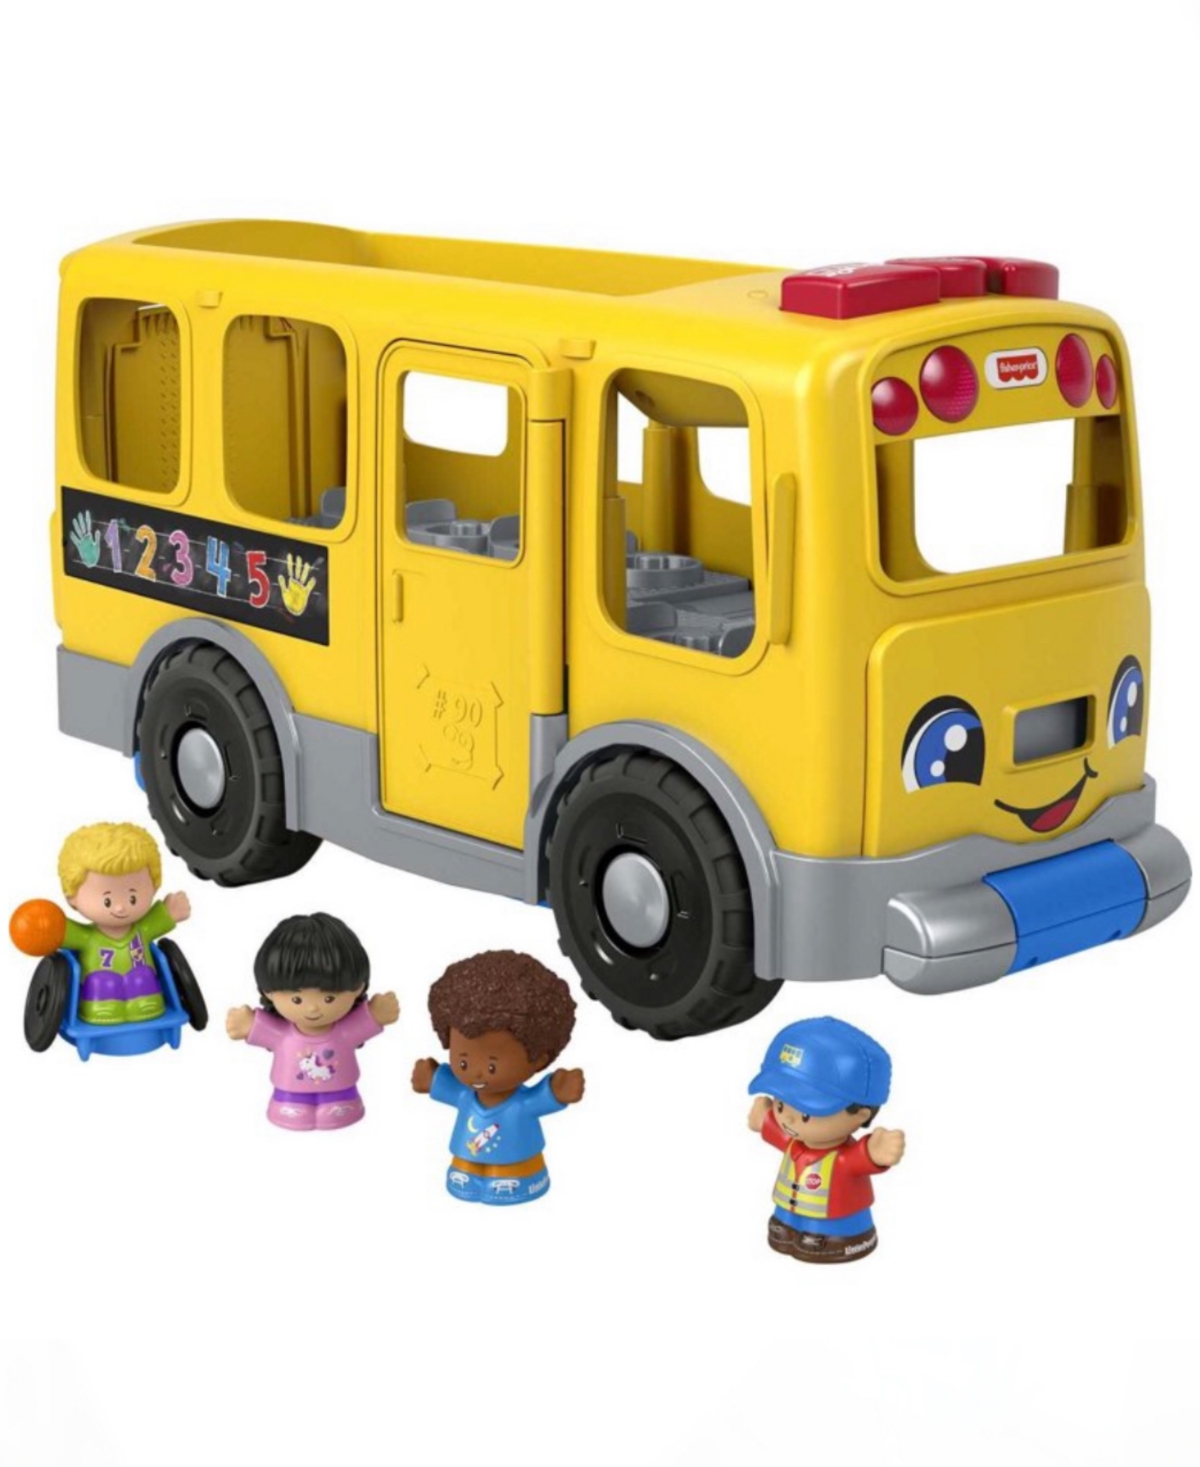 Fisher Price Babies' Time For The Big Kid Friendly, Singing With Friends School Bus In Multi Colored Plastic